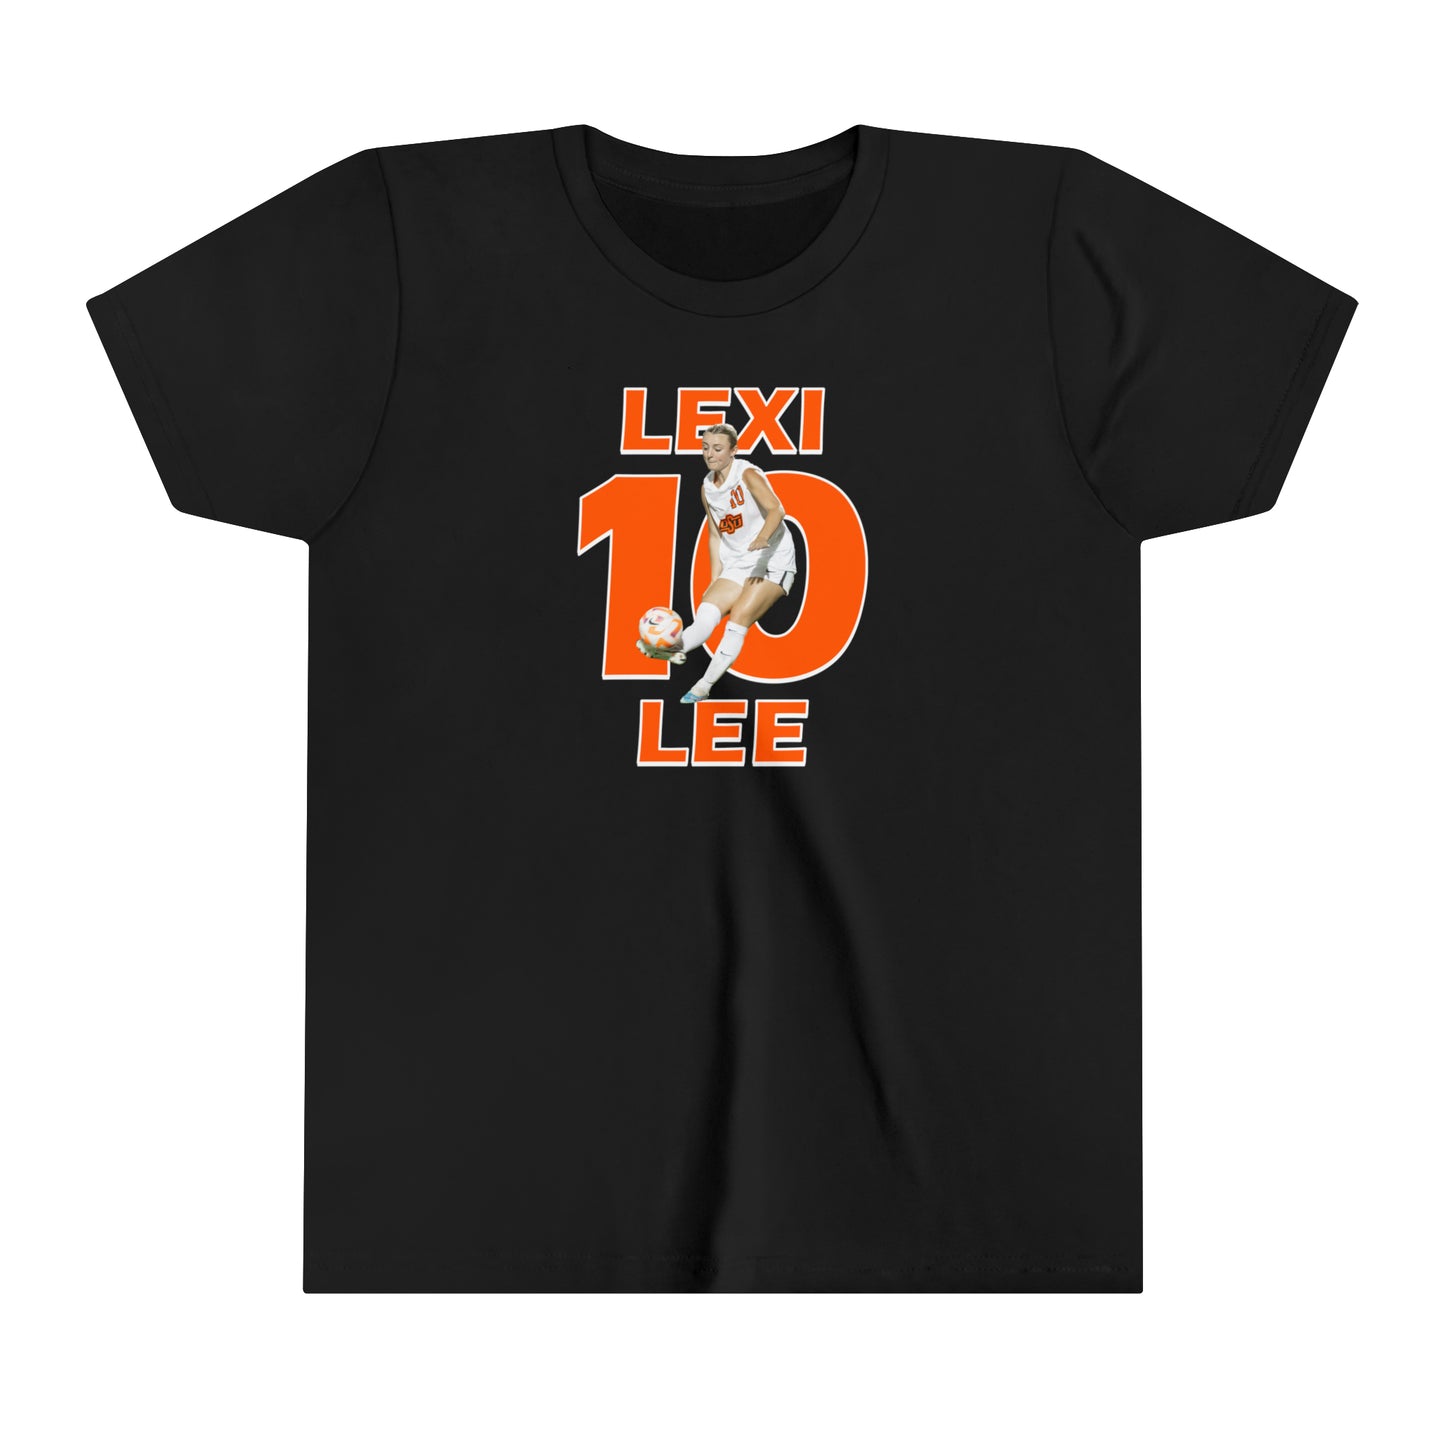 Lexi Lee Youth T-Shirt